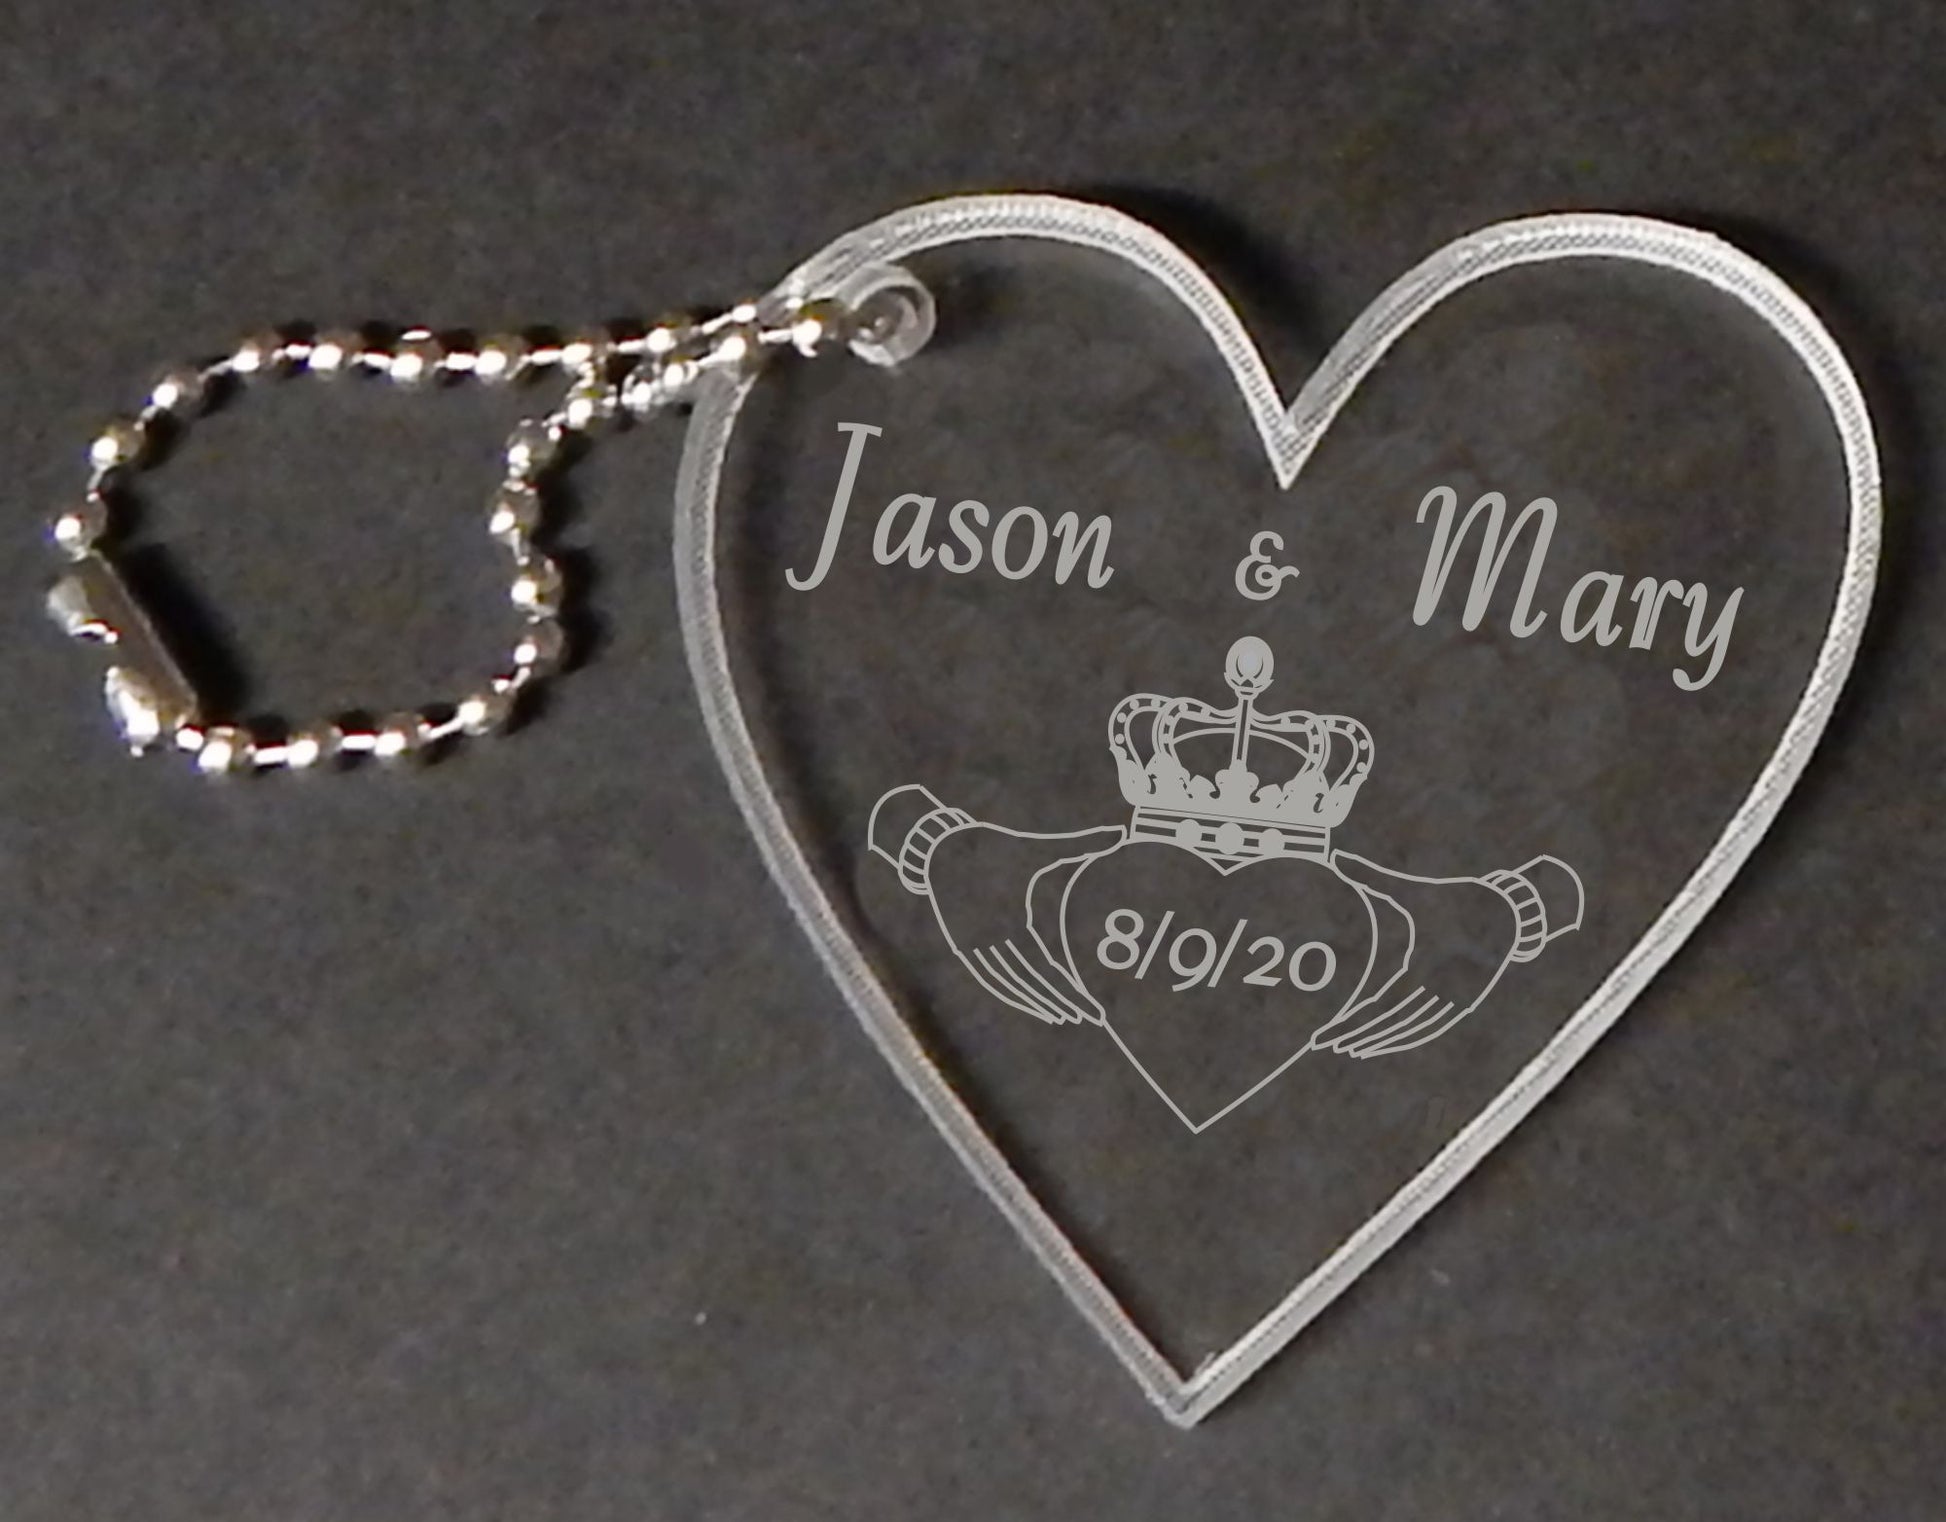 heart shaped acrylic keychain designed with a claddagh along with names and date, with a small metal chain attached